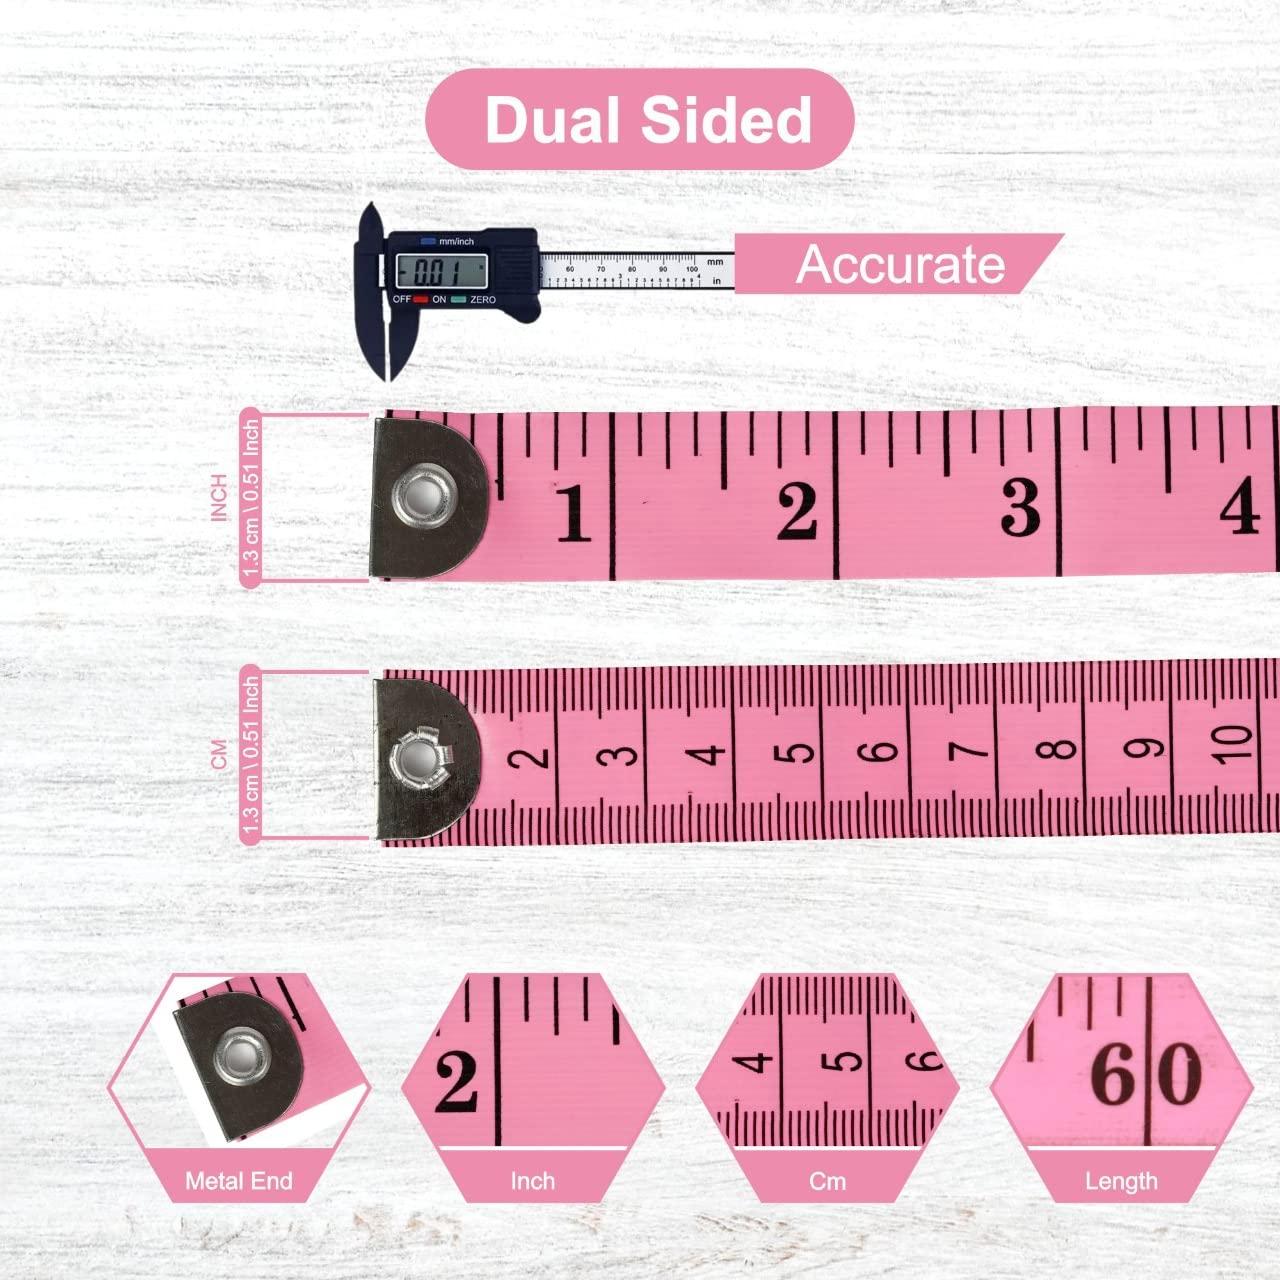 Double-sided tape measure for body measurements Flexible tape to measure  chest circumference and